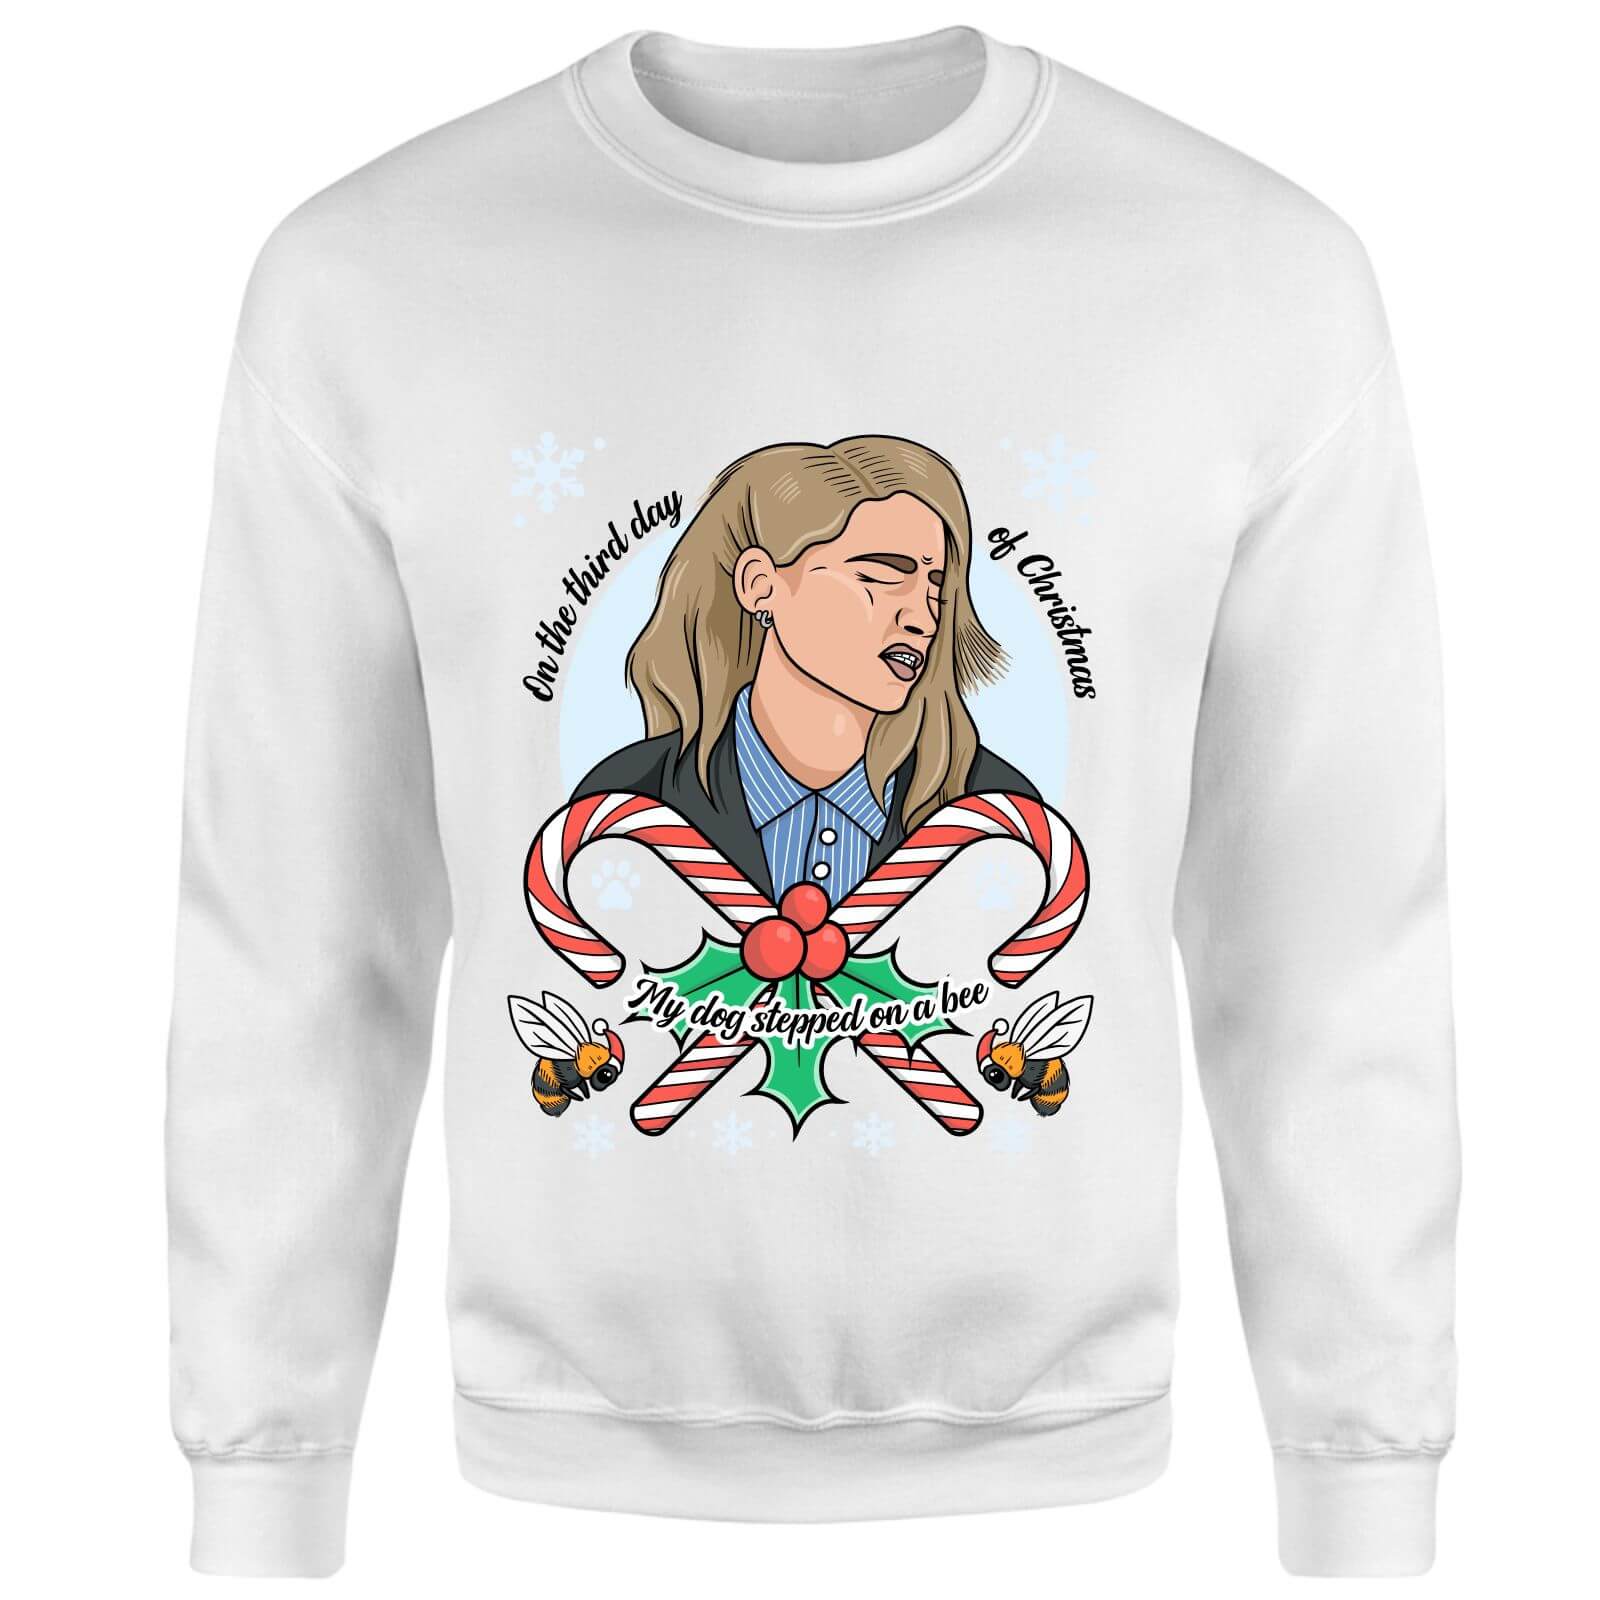 On The Third Day Of Christmas My Dog Stepped On A Bee Amber Heard Christmas Sweatshirt - White - XS - White